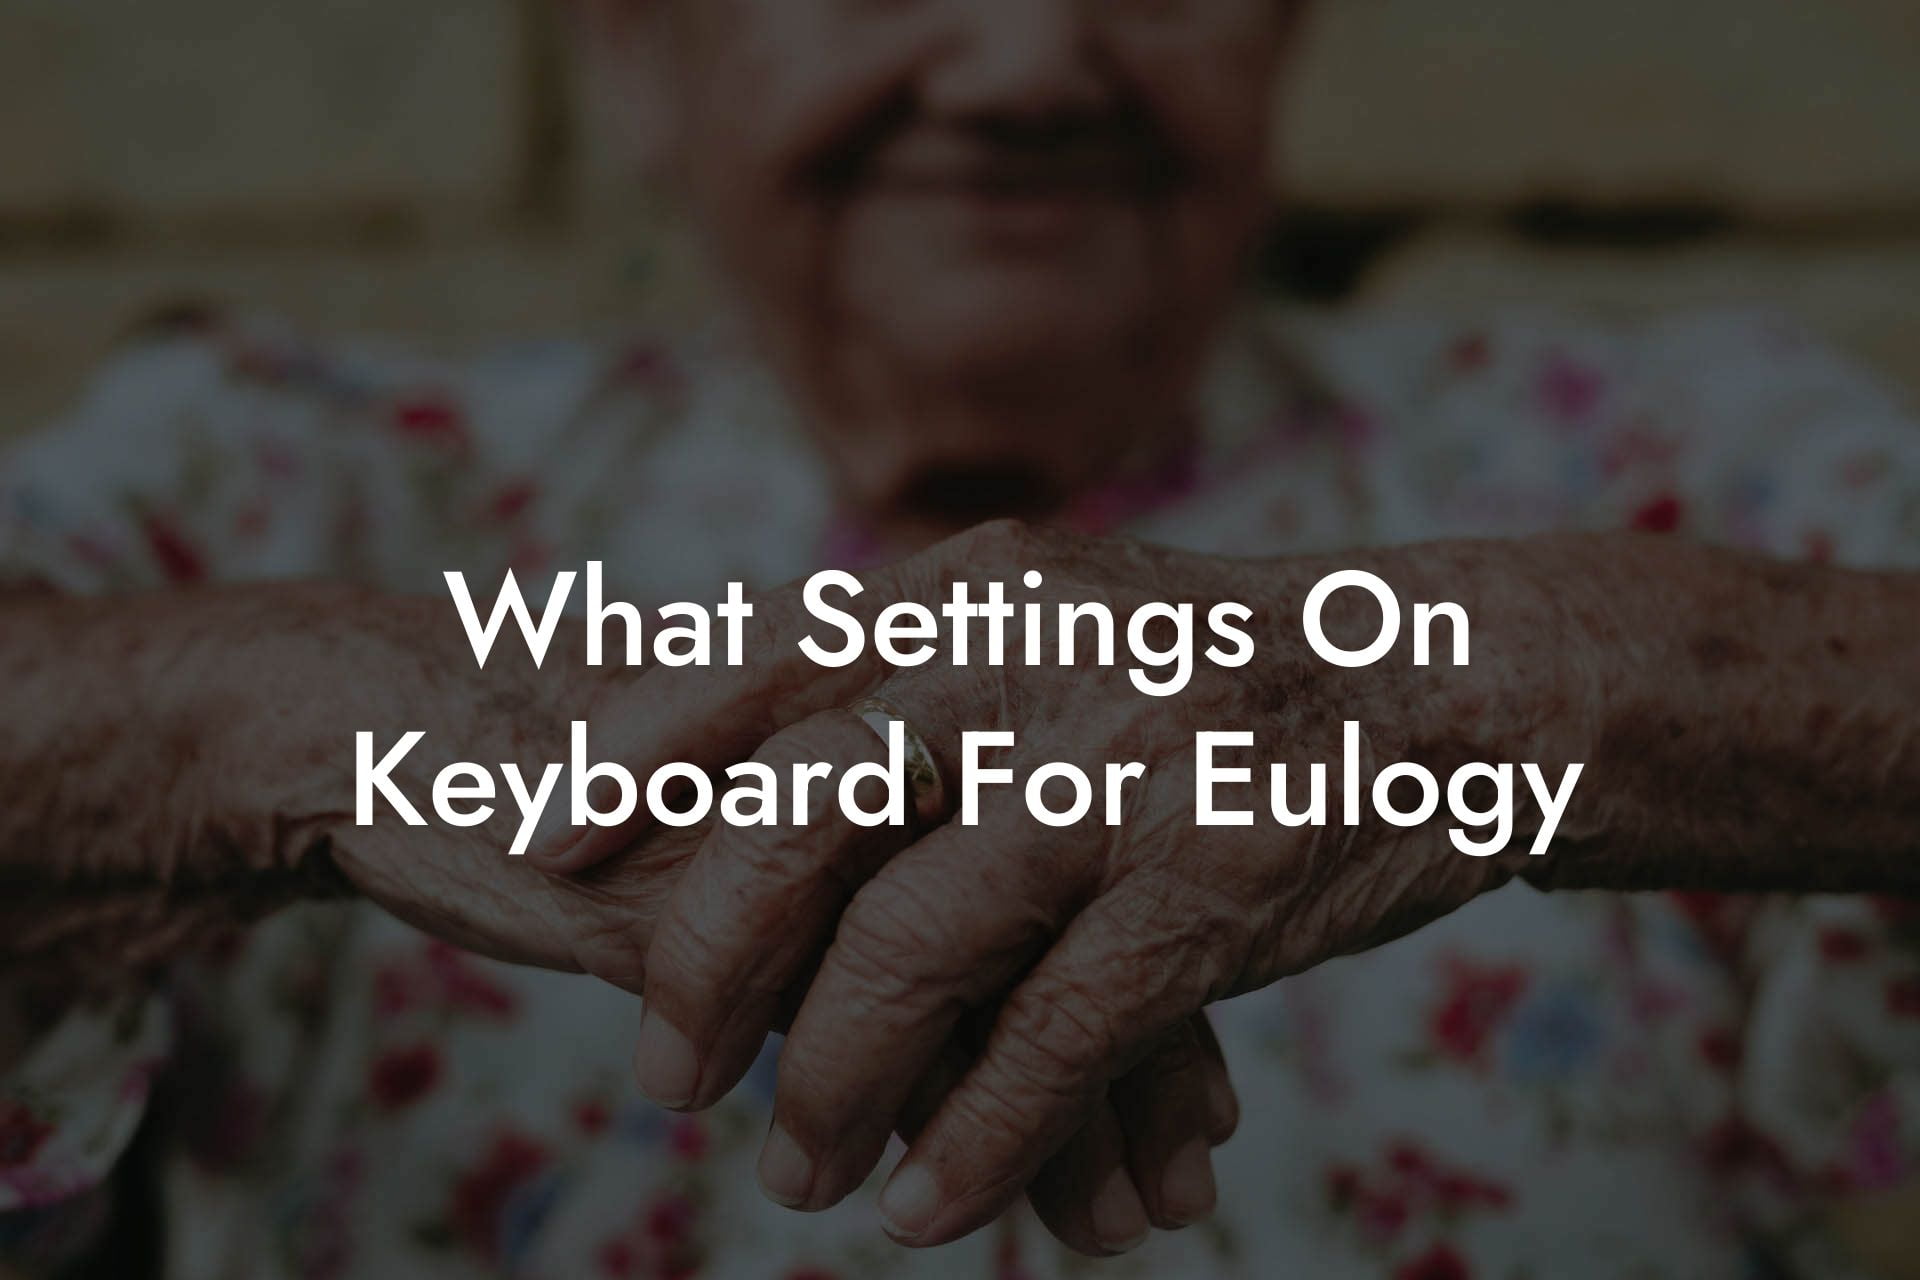 What Settings On Keyboard For Eulogy